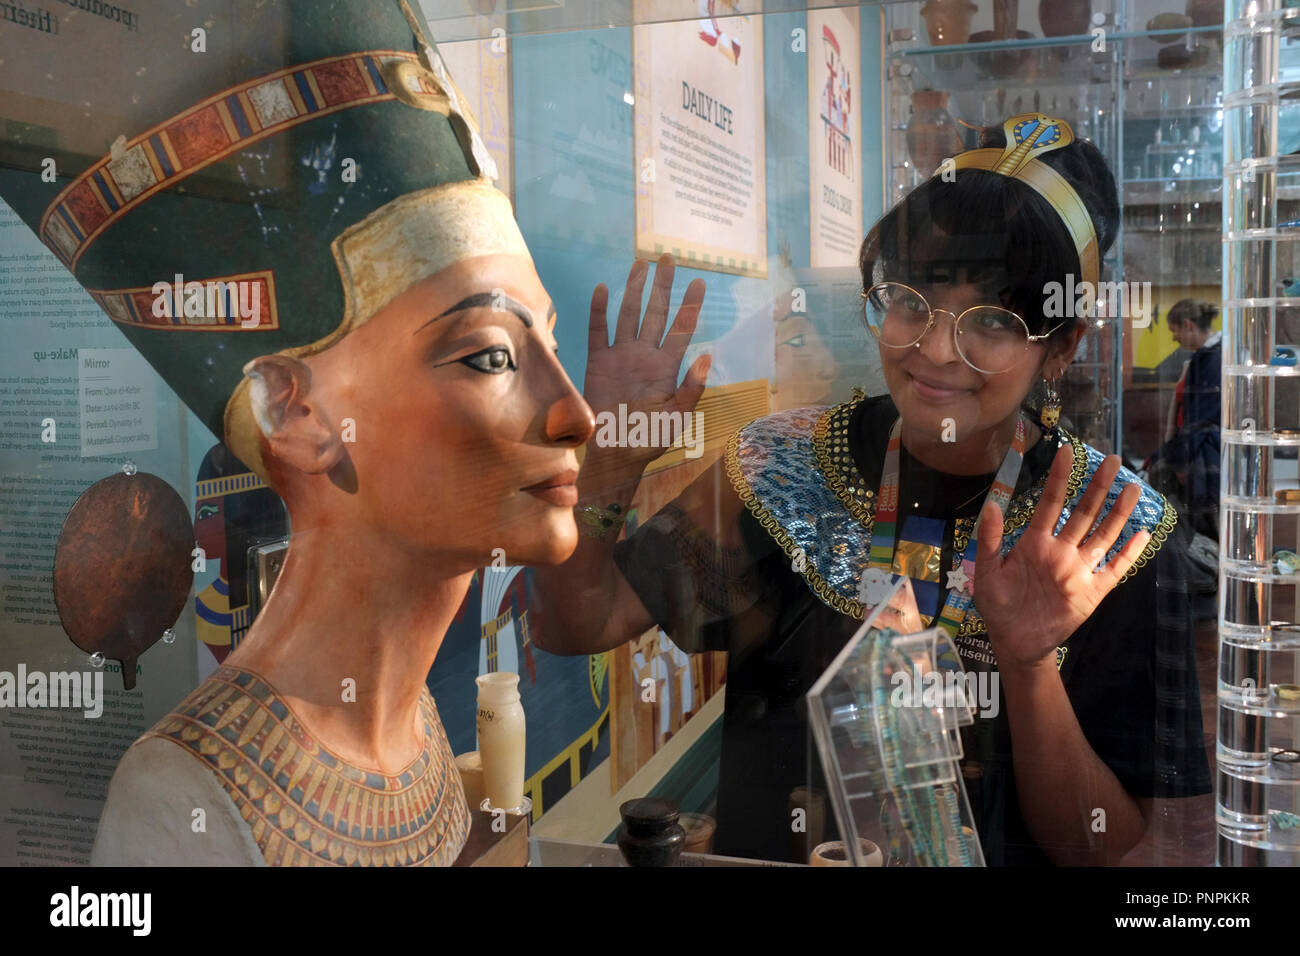 22-09-2018 Bolton Museum & Art Gallery reopens to the public after a £3.8 million revamp with extensive improvements to the Egyptology gallery. Bolton’s collection is one of the most significant ancient Egyptian collections in the UK Shaheen Mogradia visitor engagement assistant is pictured with a bust of Nefertiti dated 1340 BC which was discovered in 1912 this is an early 20th Century copy. photo Don Tonge Stock Photo